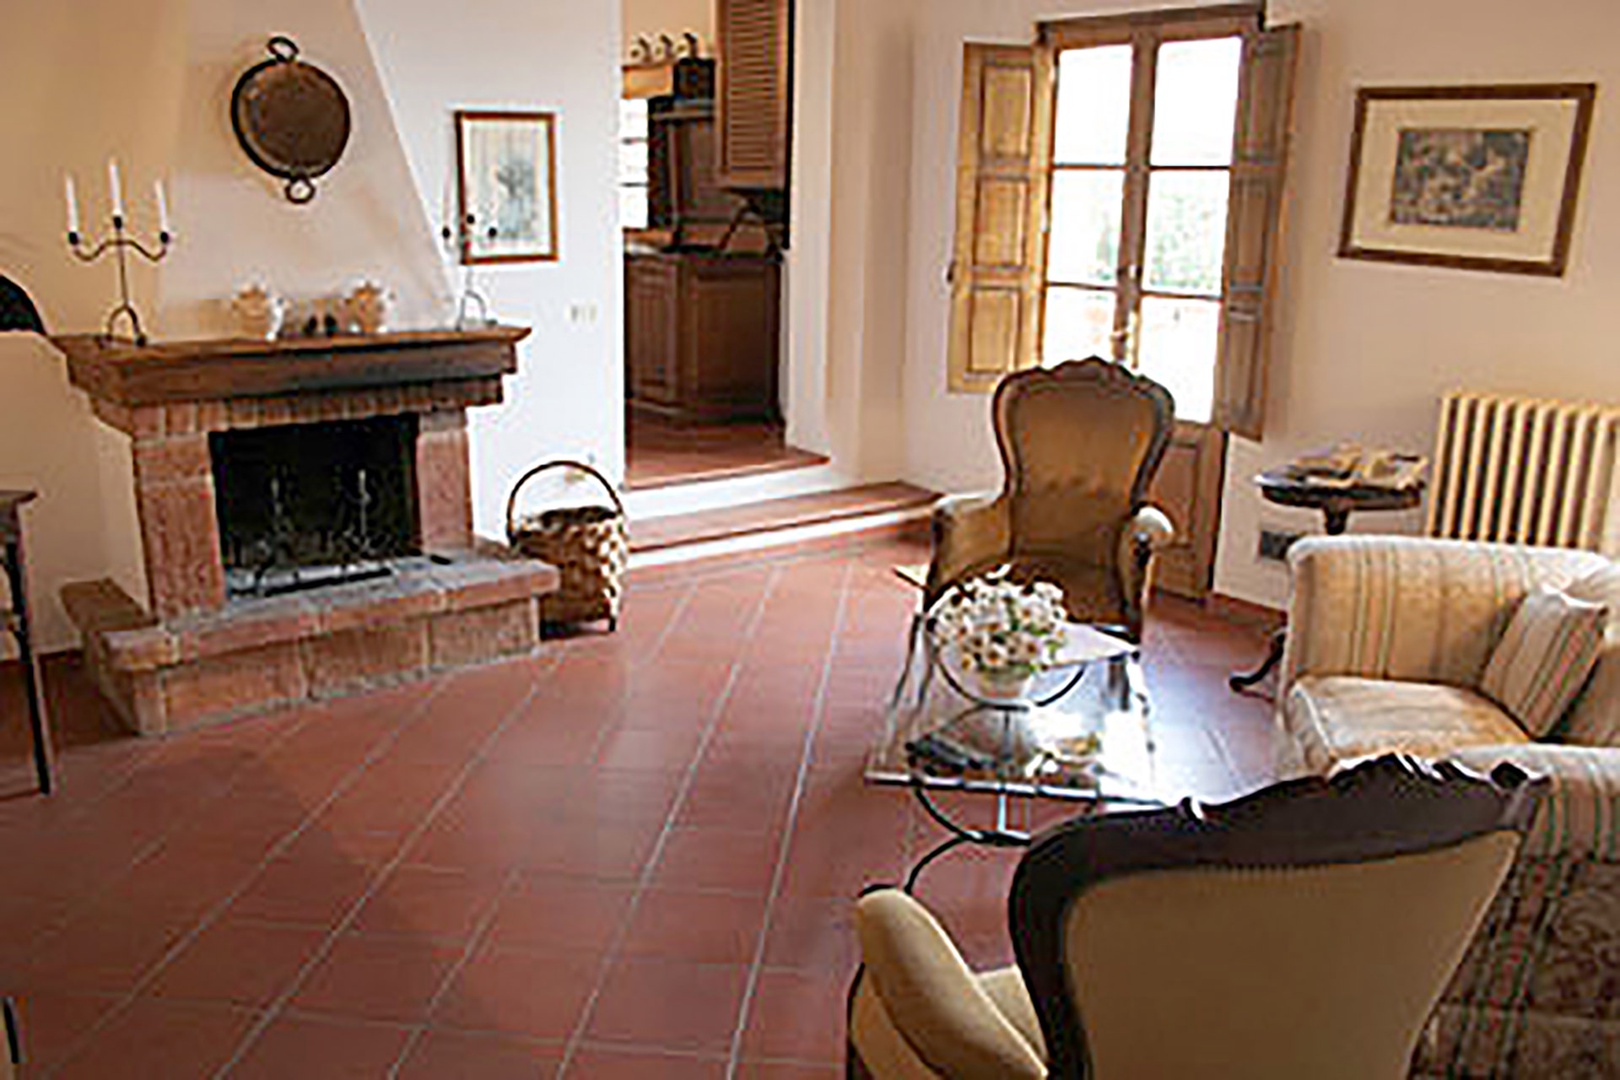 Loggetta's spacious living room and working fireplace.